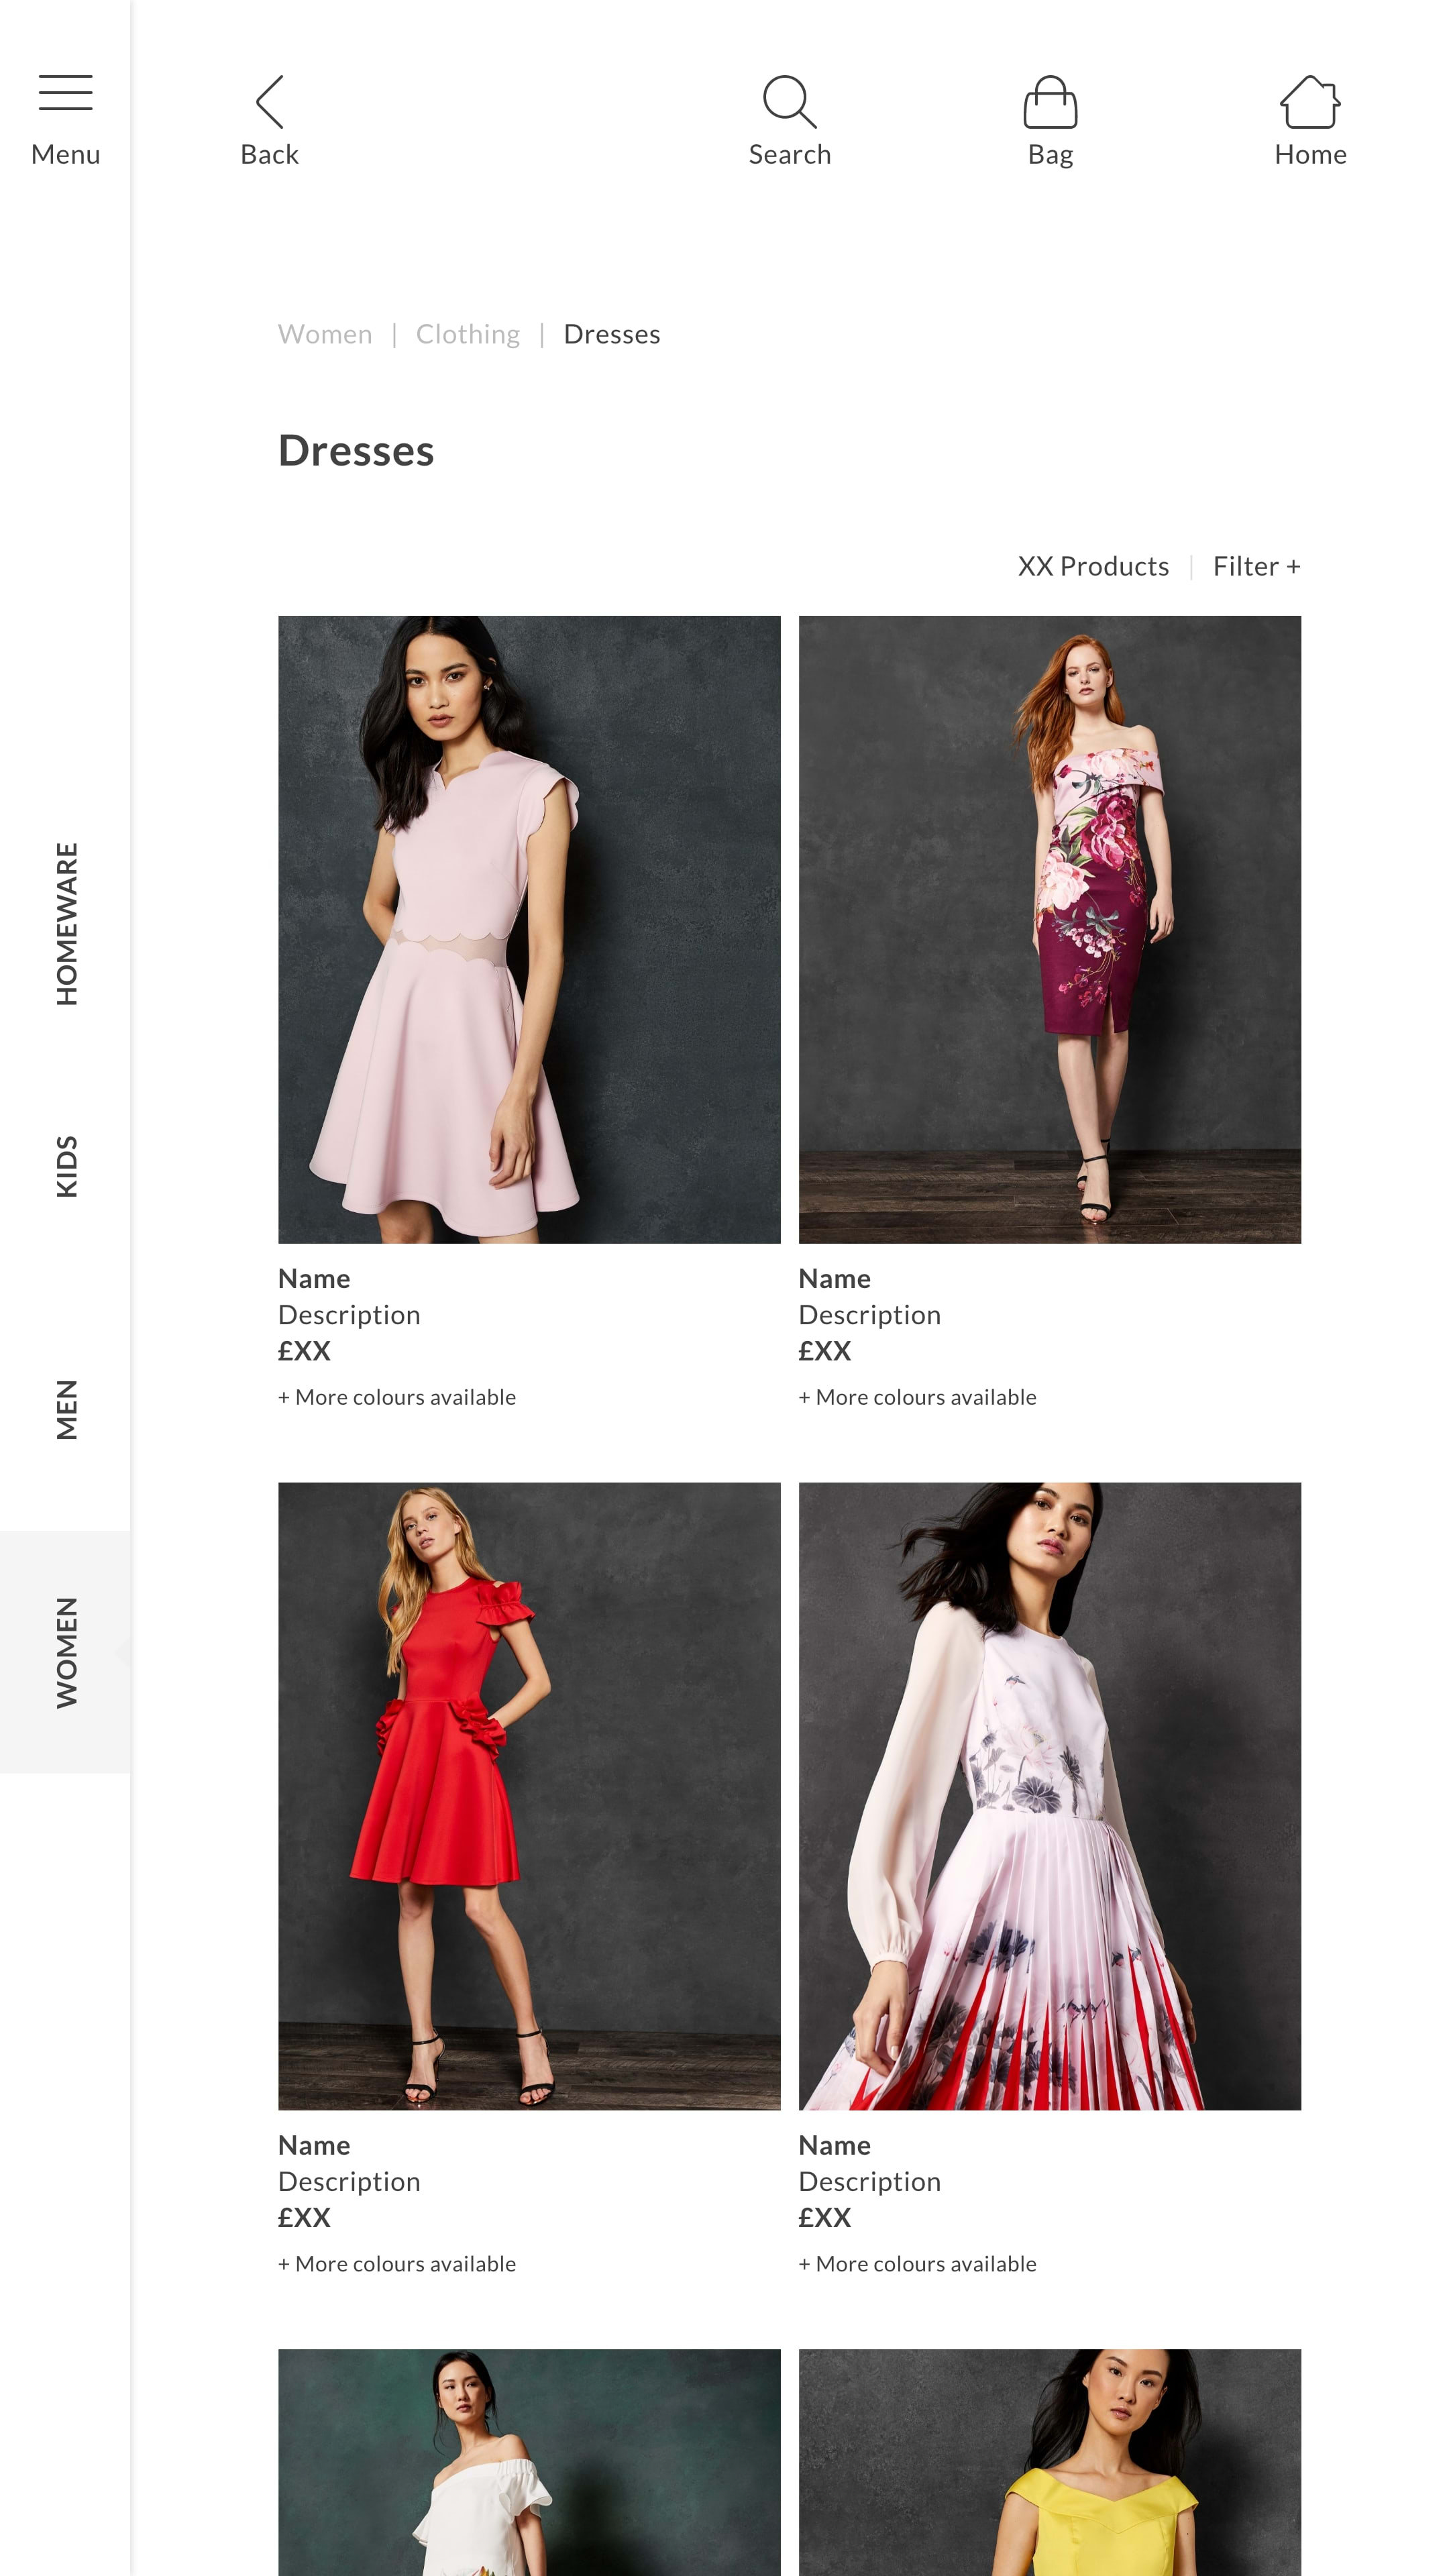 Women's dresses category page